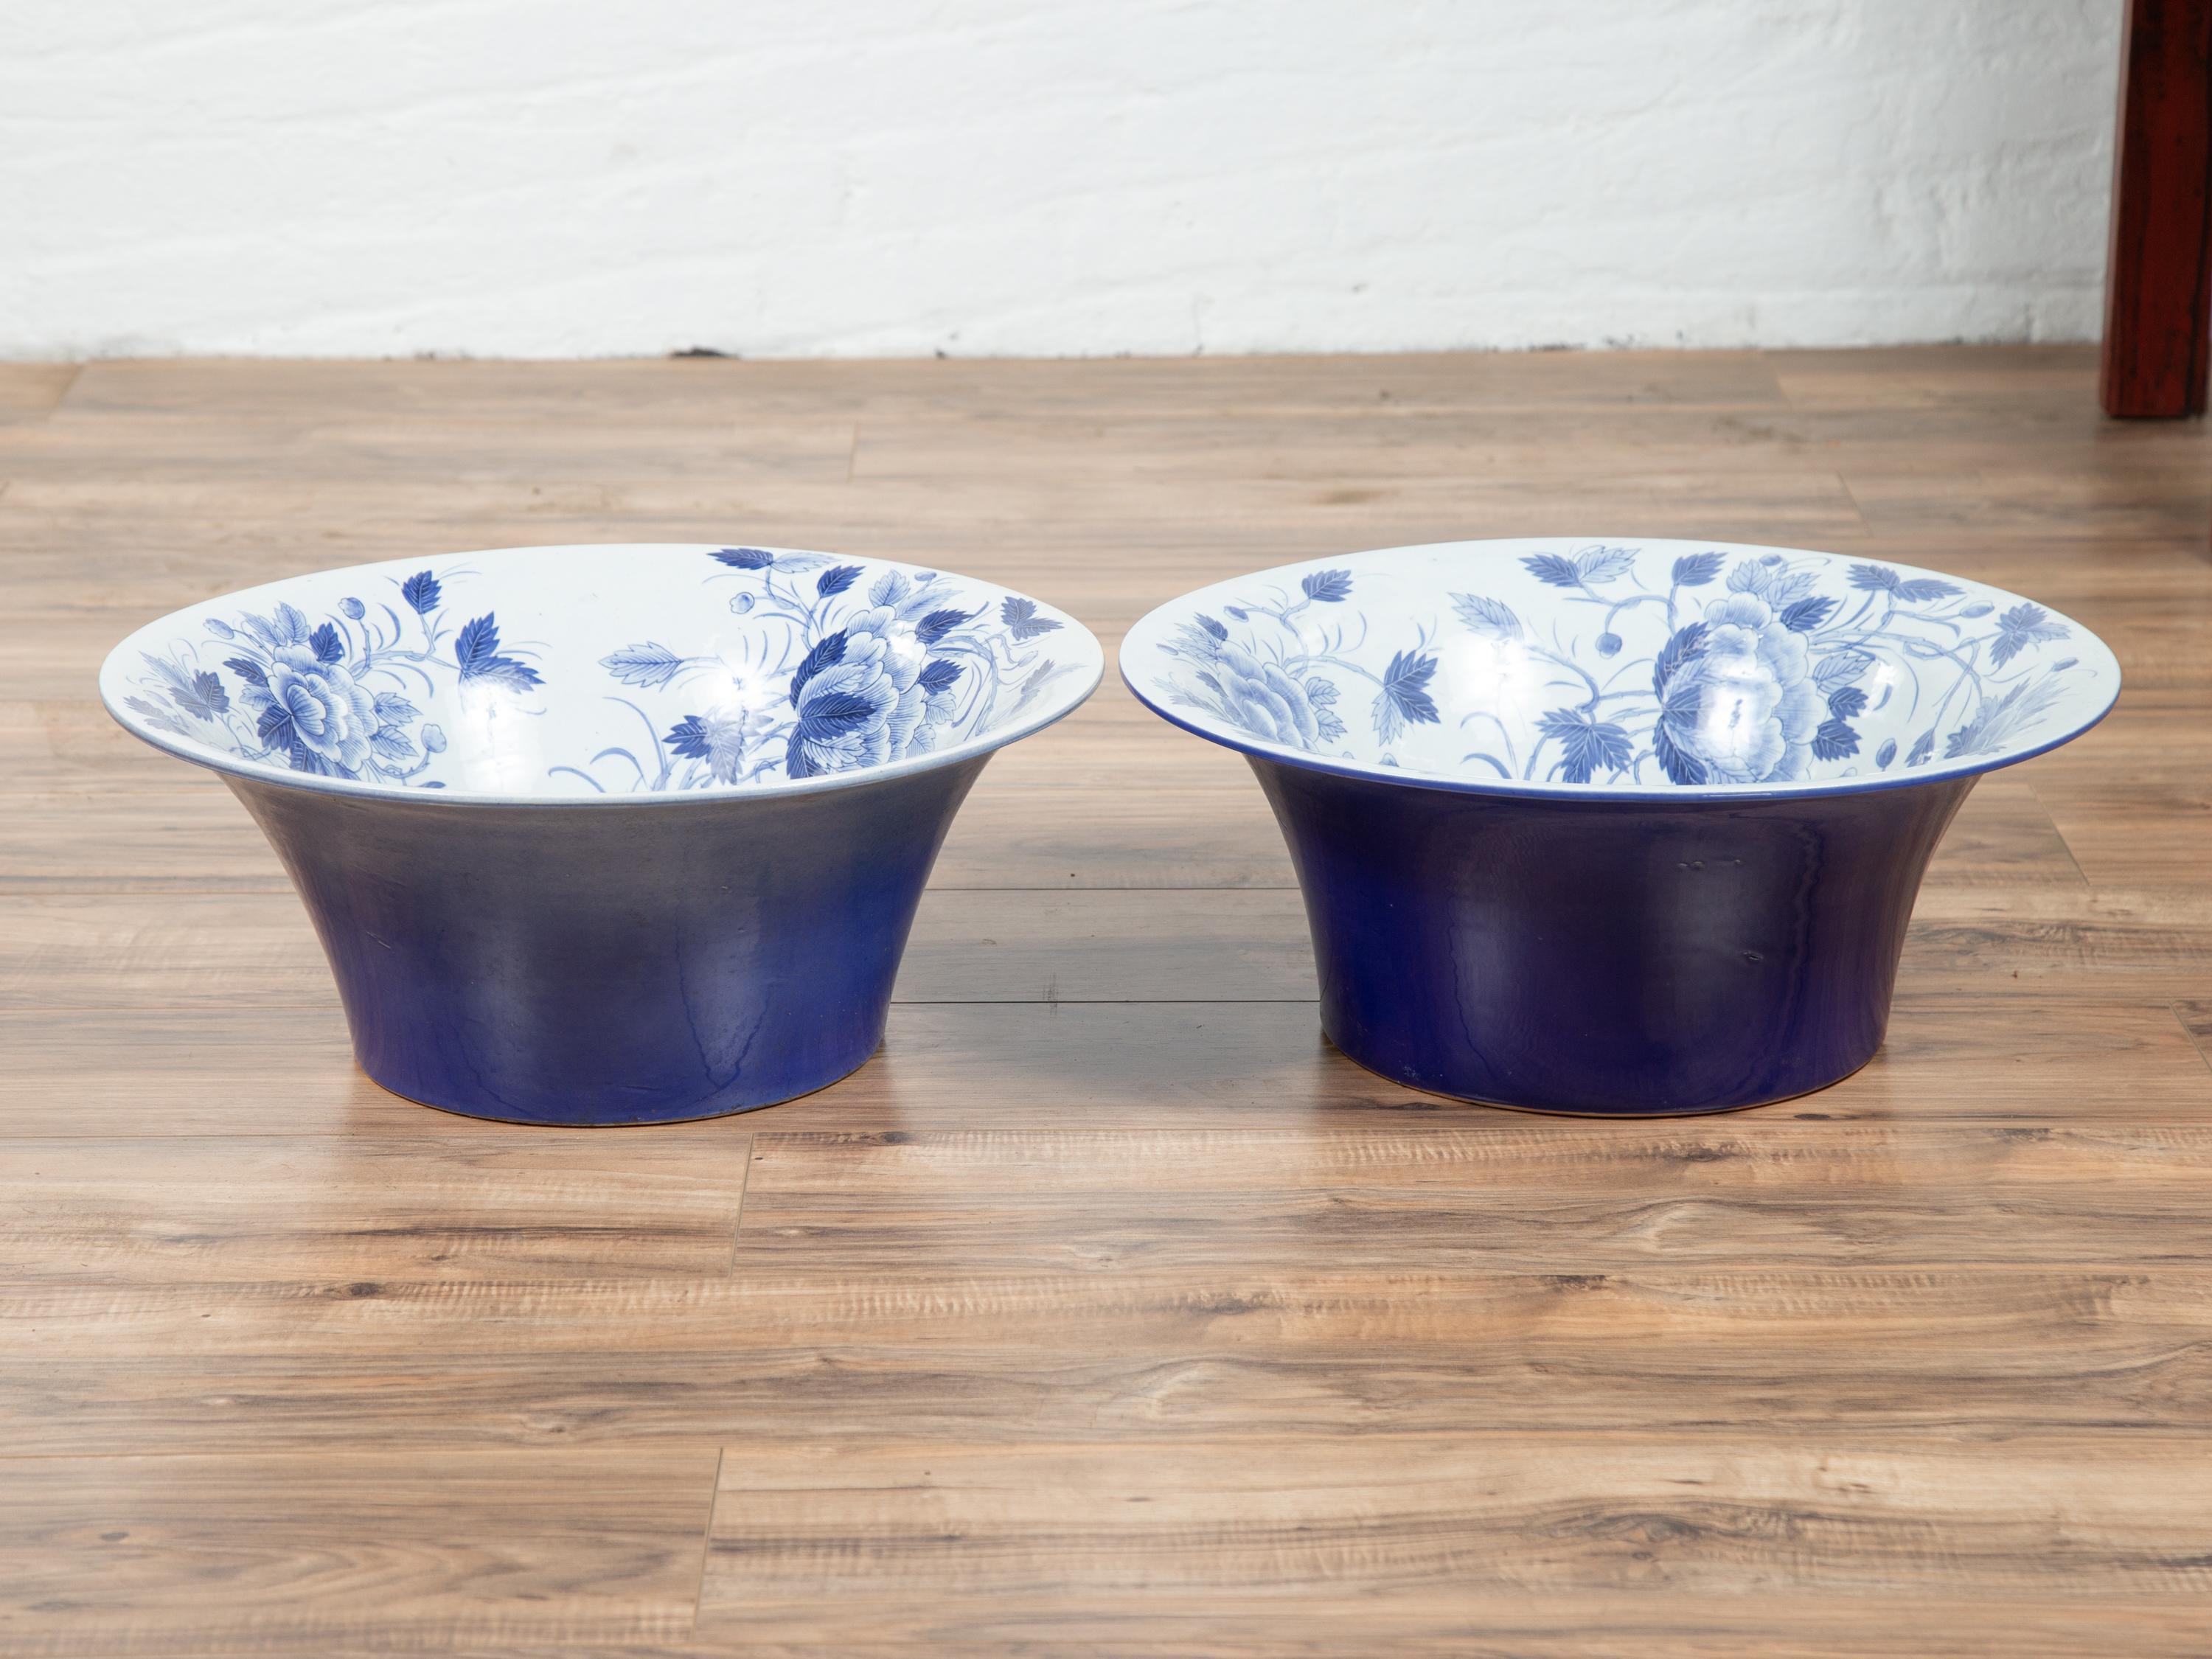 Blue and White Porcelain Wash Basin with Cobalt Blue Patina and Floral Motifs For Sale 5